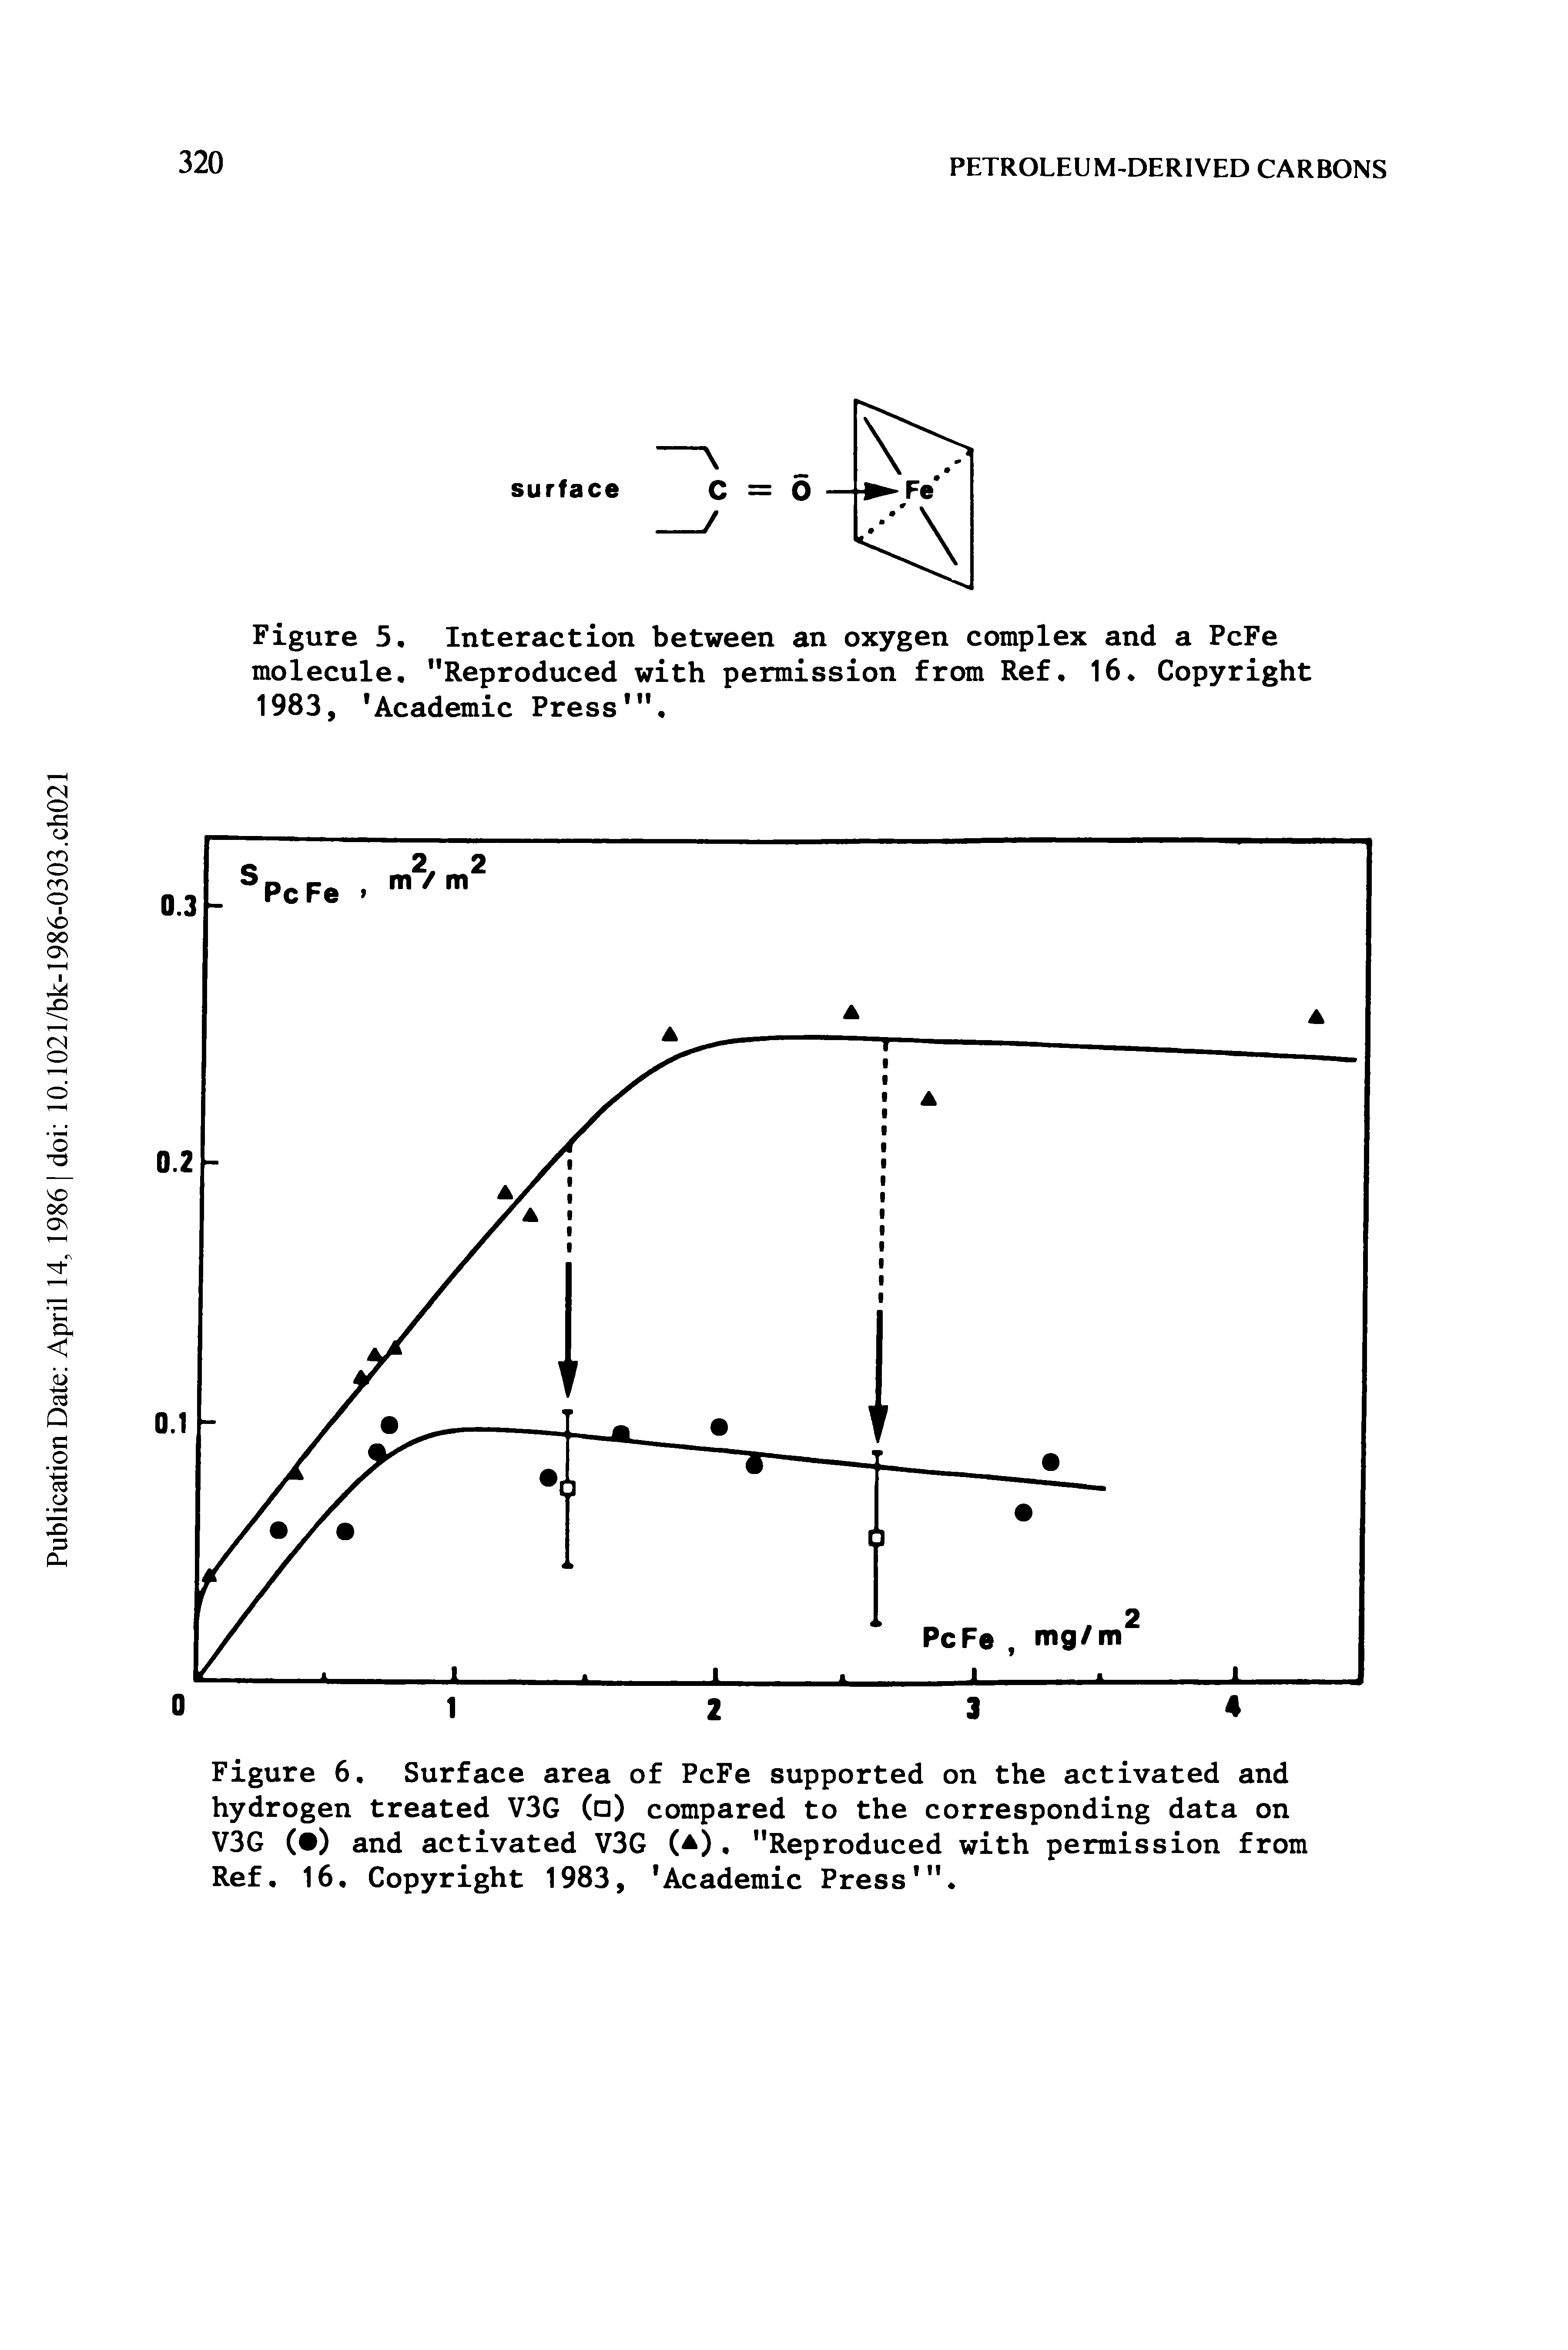 Figure 6. Surface area of PcFe supported on the activated and hydrogen treated V3G ( ) compared to the corresponding data on V3G ( ) and activated V3G (a), "Reproduced with permission from Ref. 16, Copyright 1983, Academic Press ".